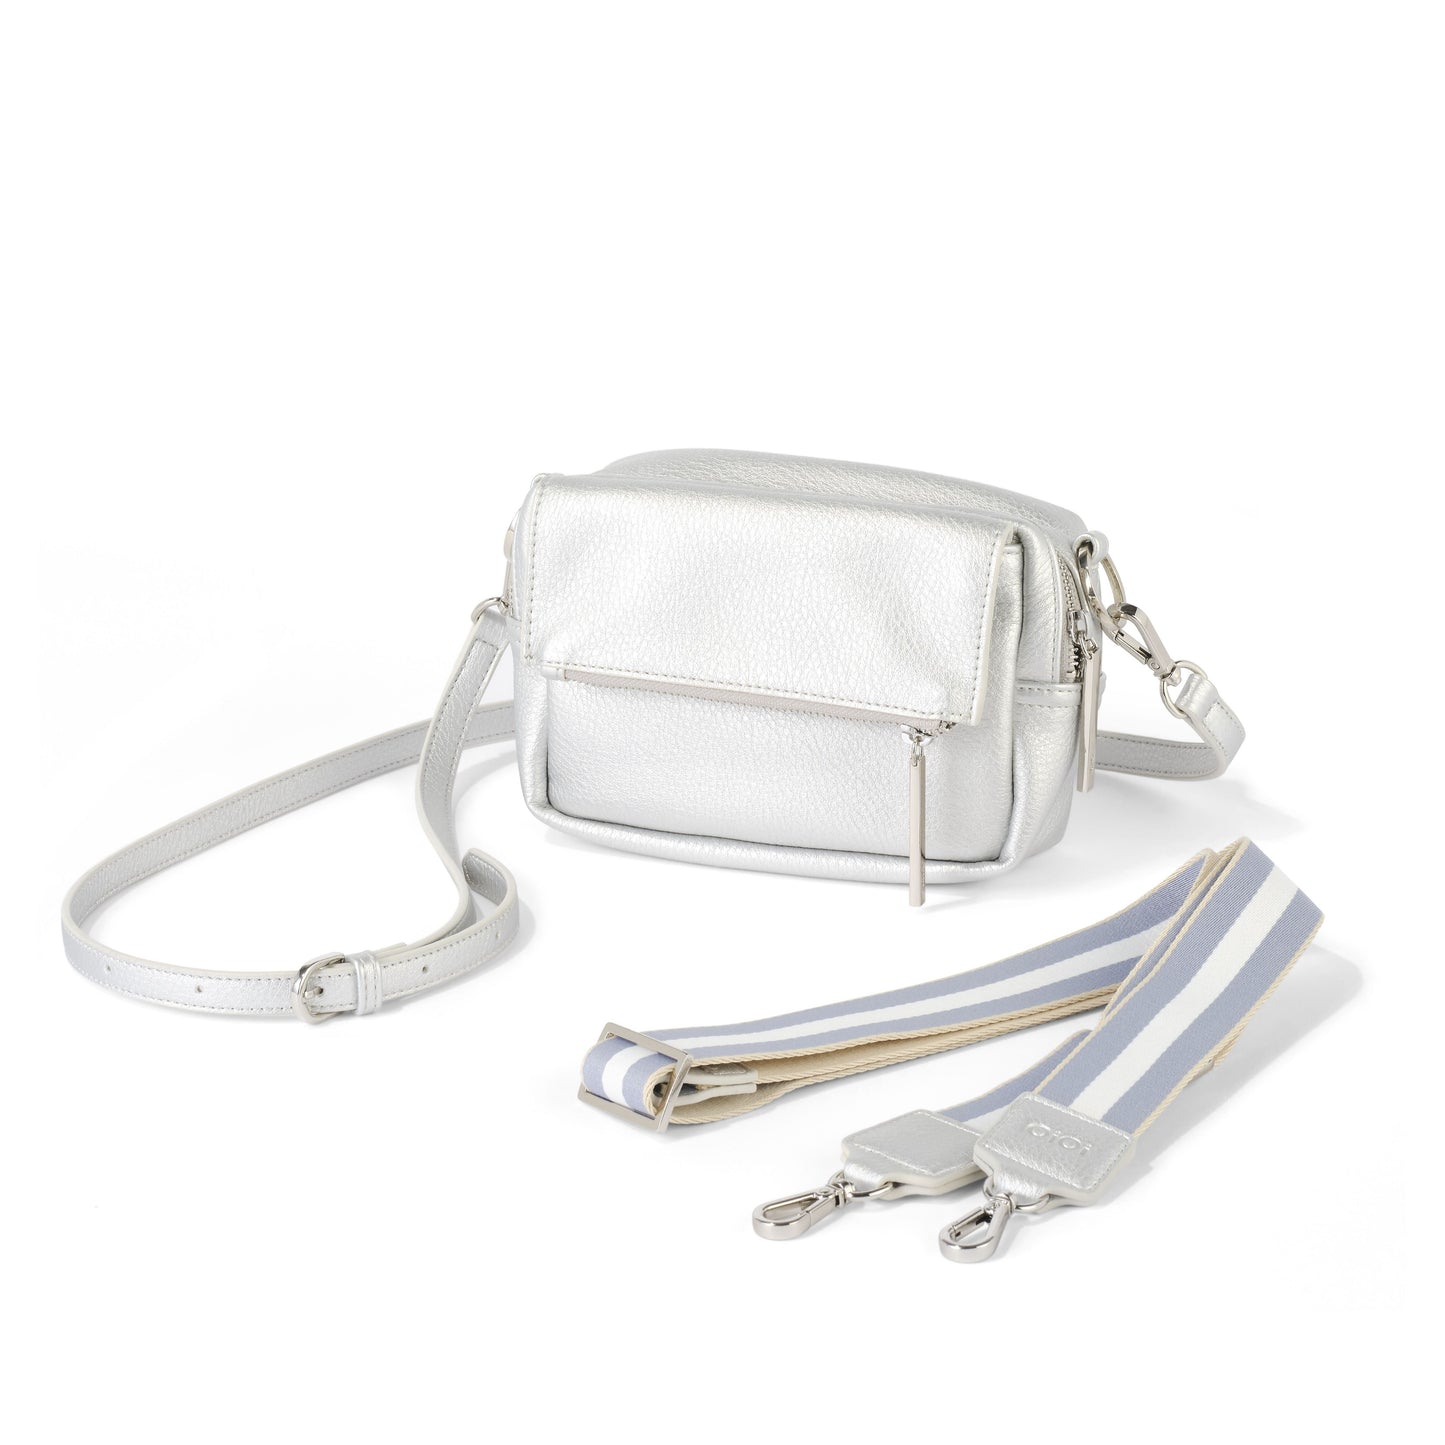 Playground Cross-Body Bag - Silver Dimple Vegan Leather